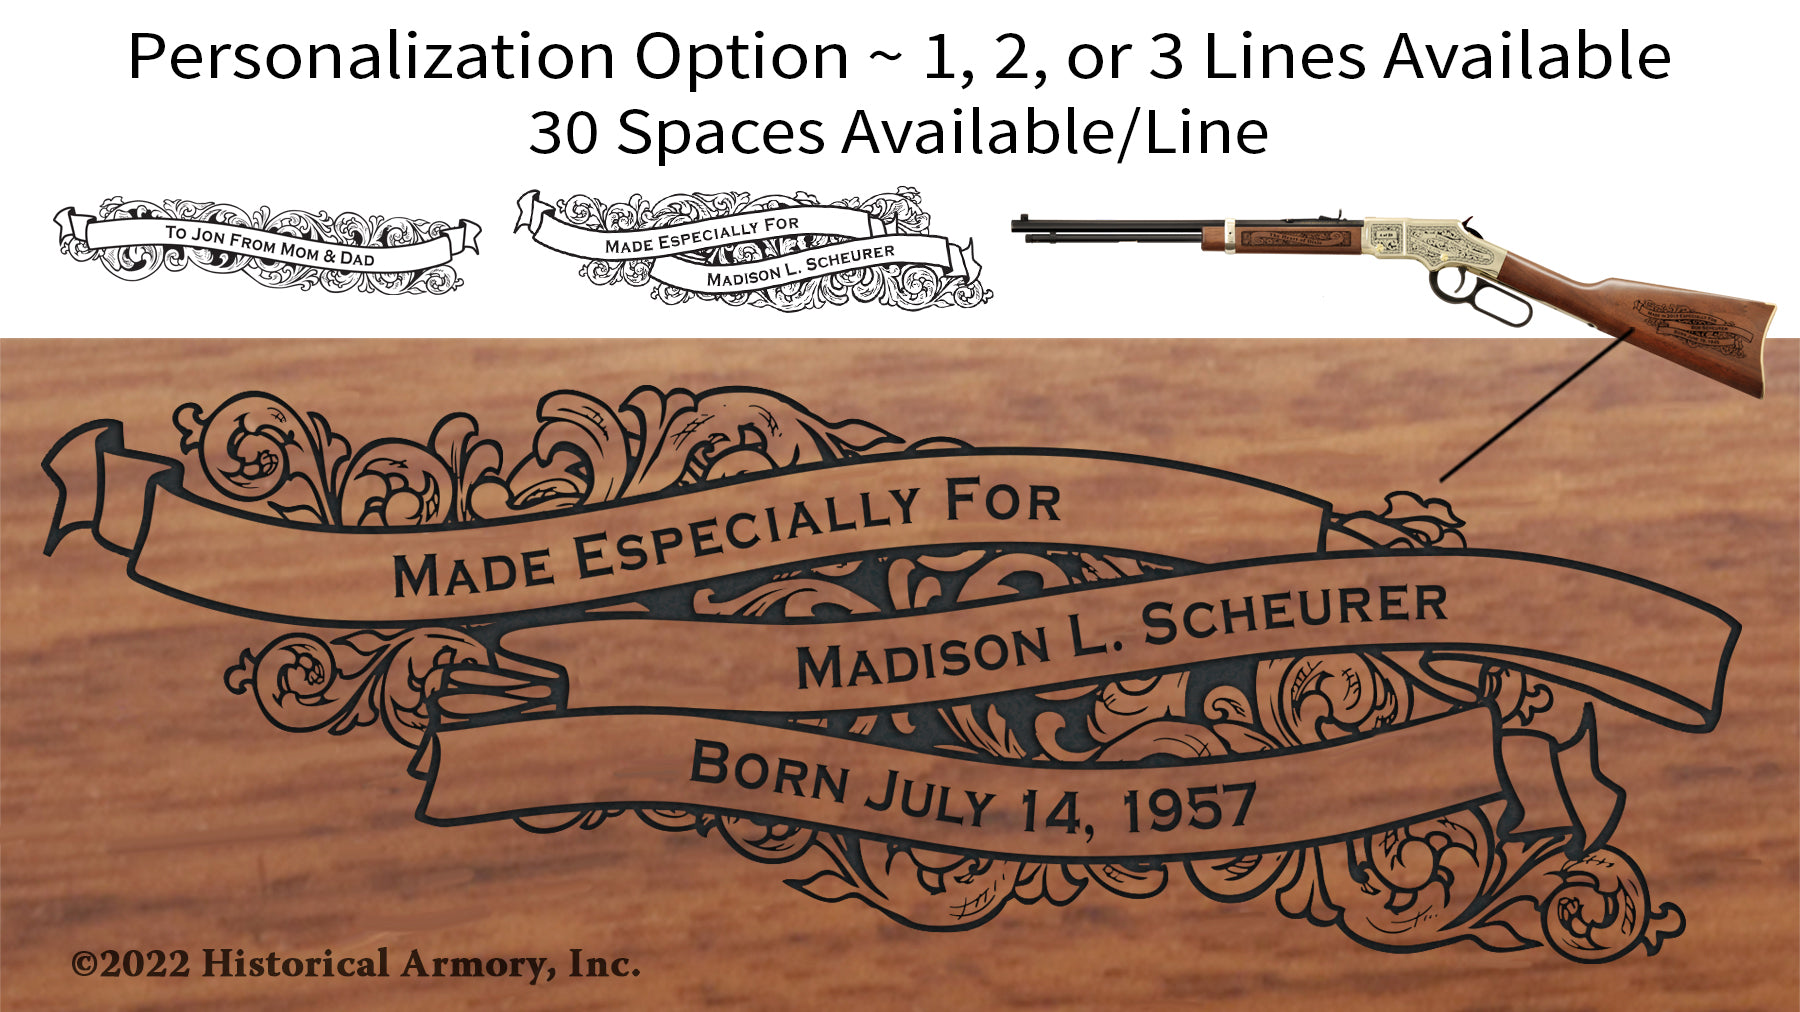 Lenawee County Michigan Engraved Rifle Personalization